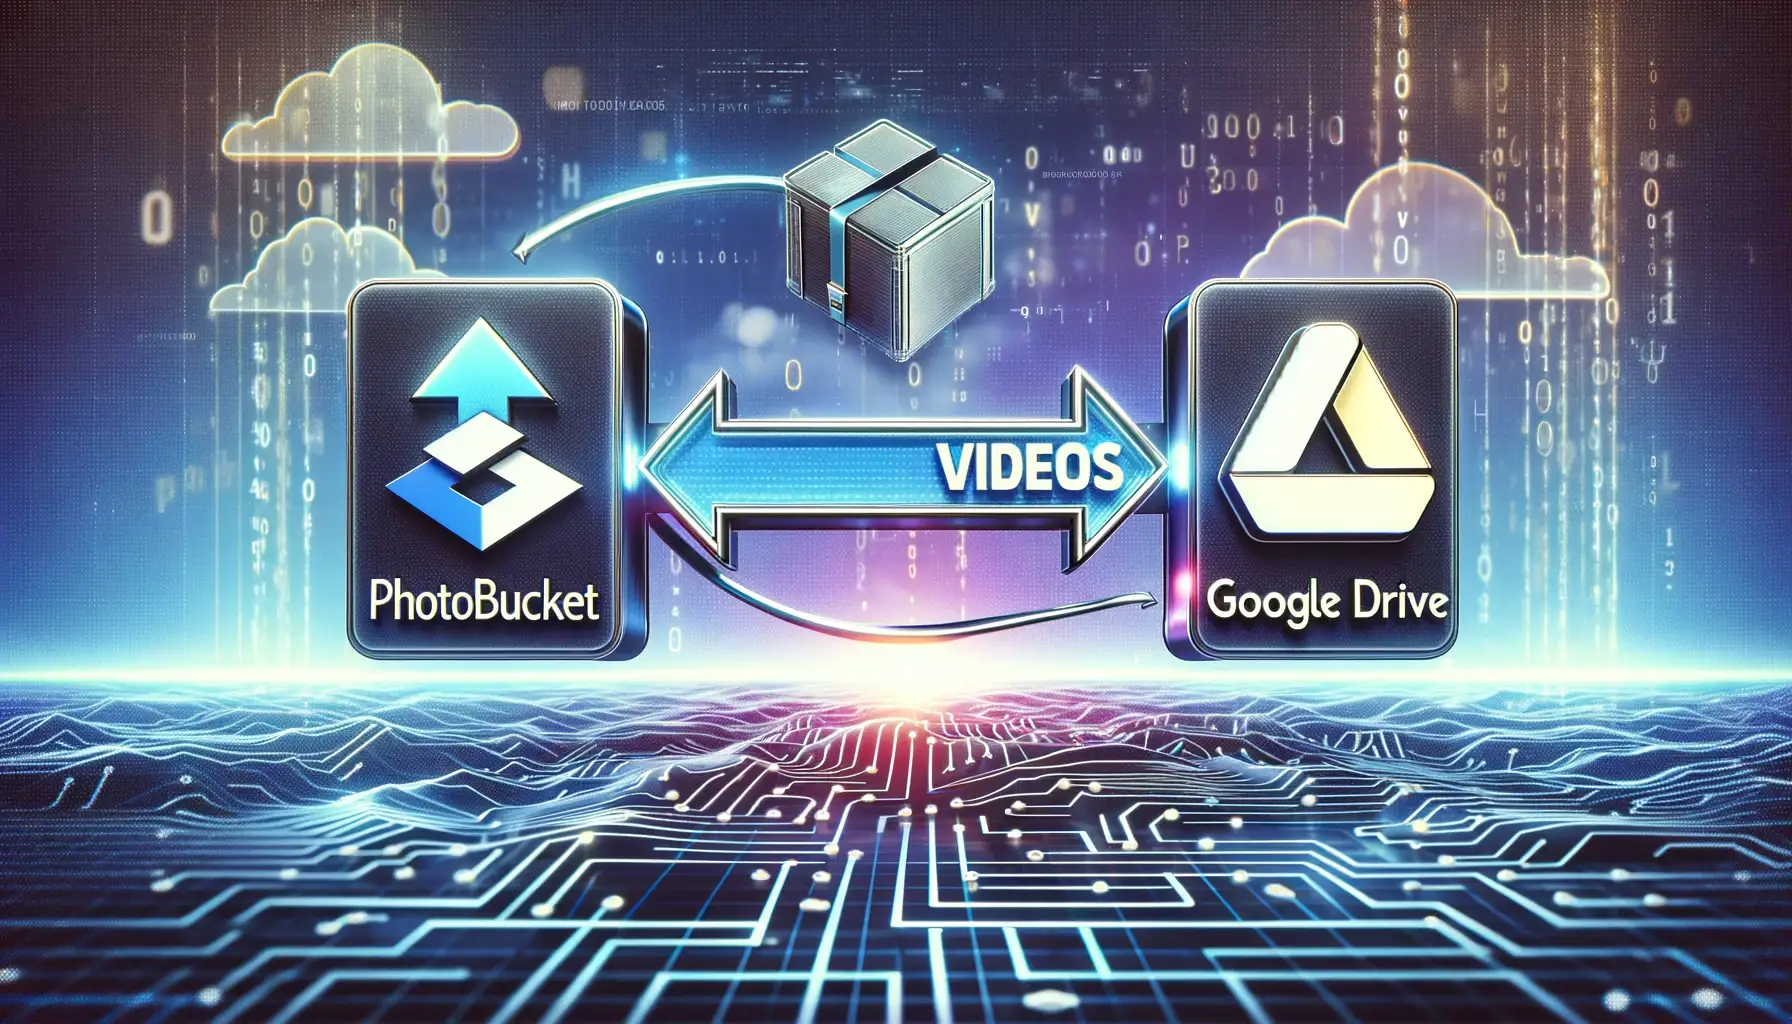 How to Move Videos from Photobucket to Google Drive?